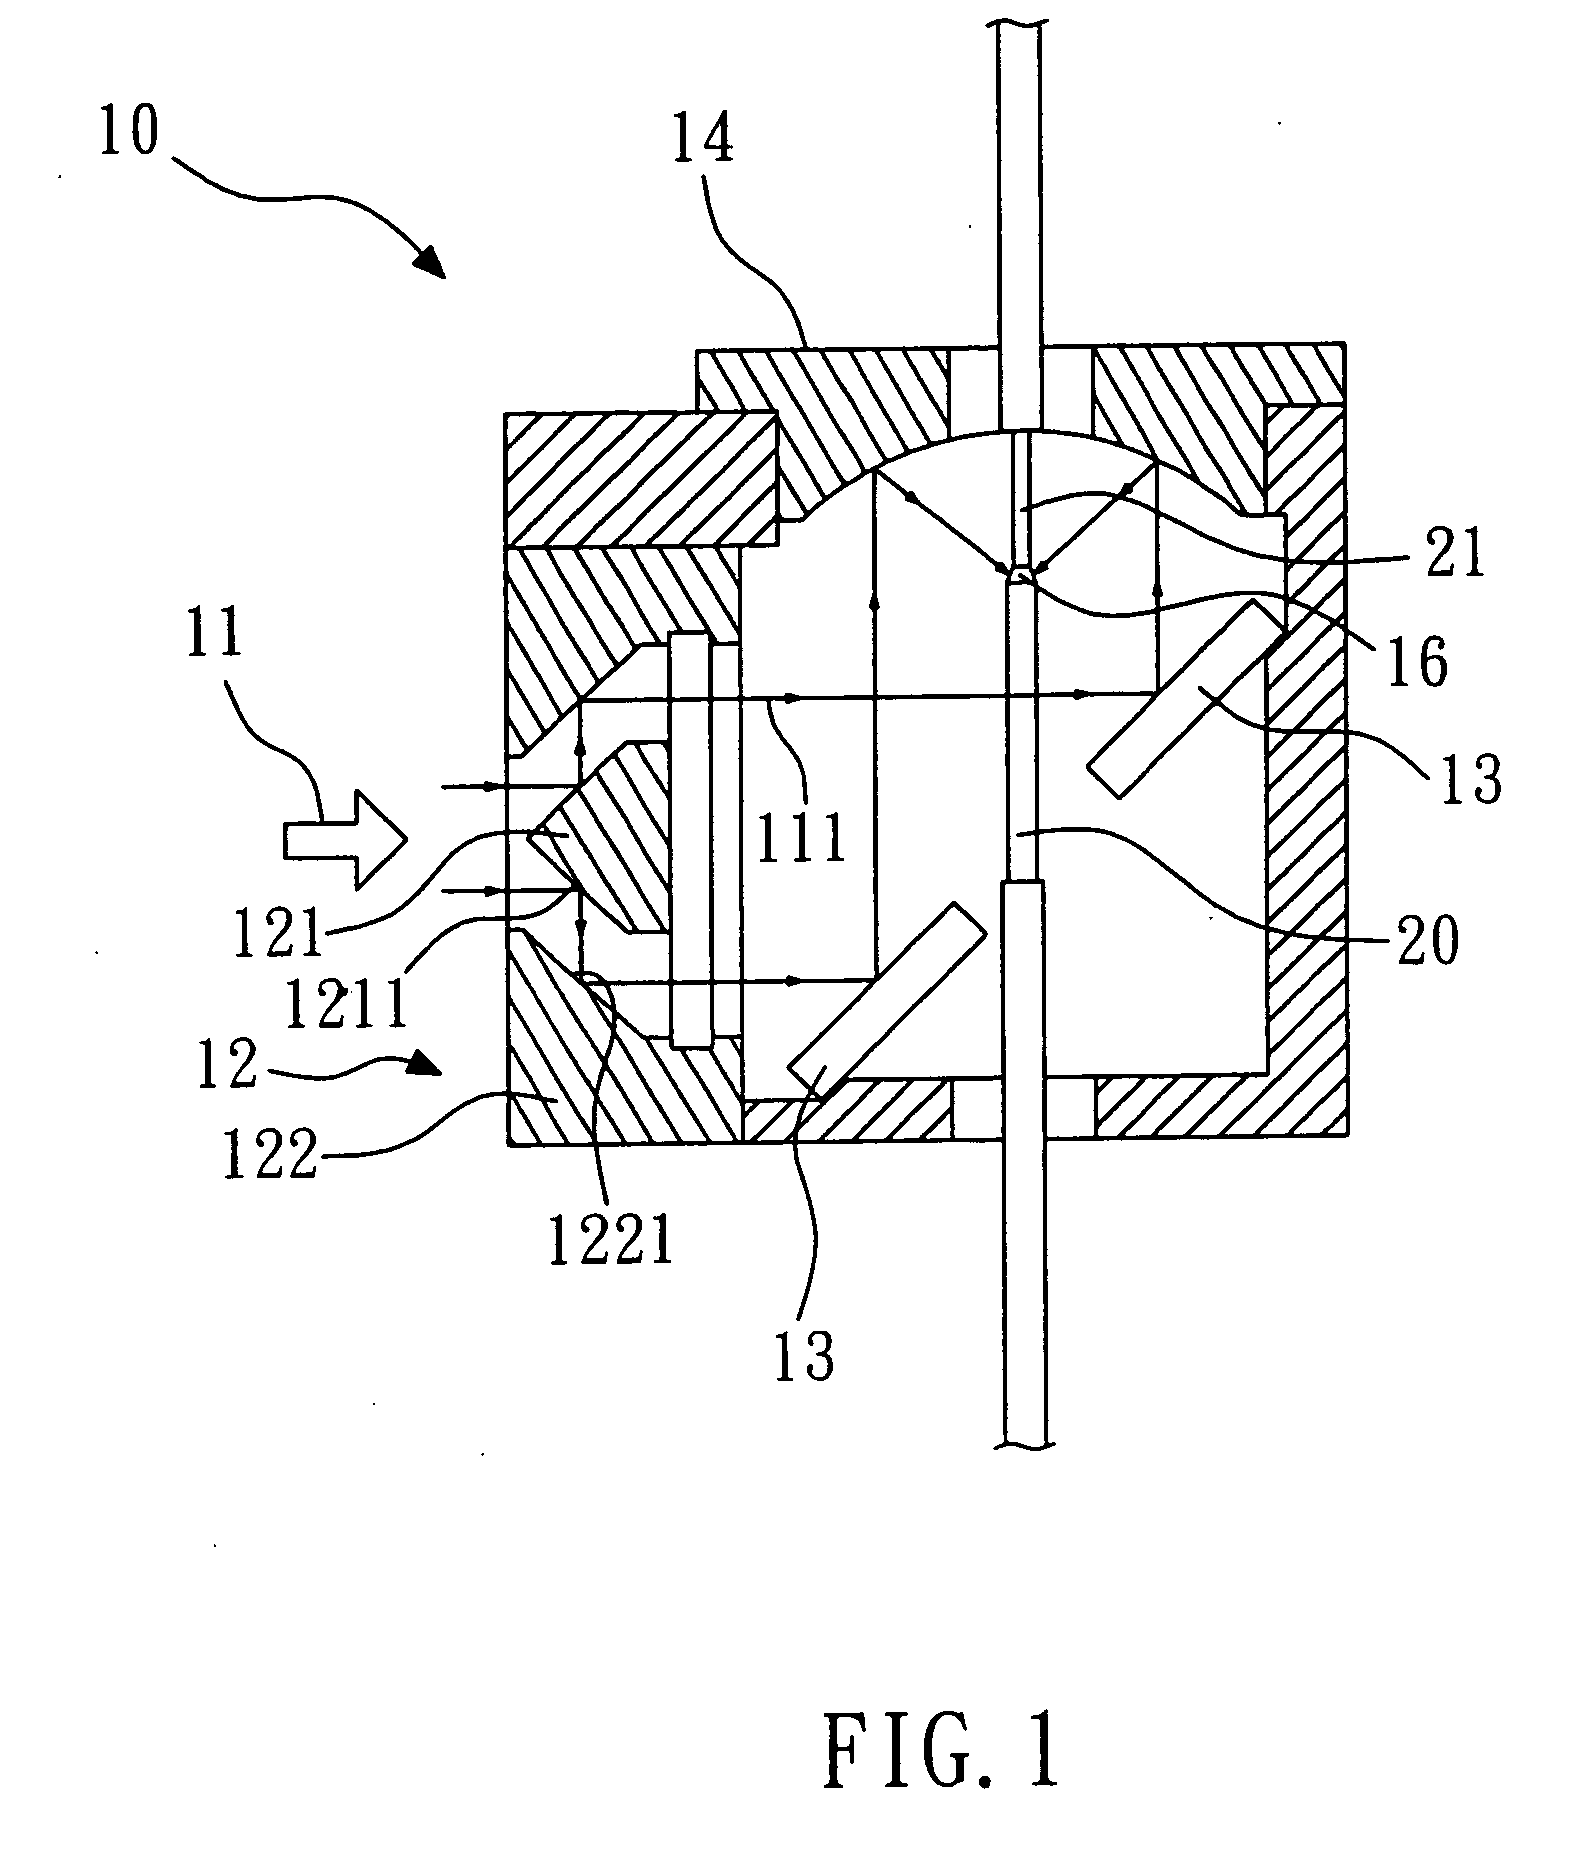 Fiber used in wideband amplified spontaneous emission light source and the method of making the same